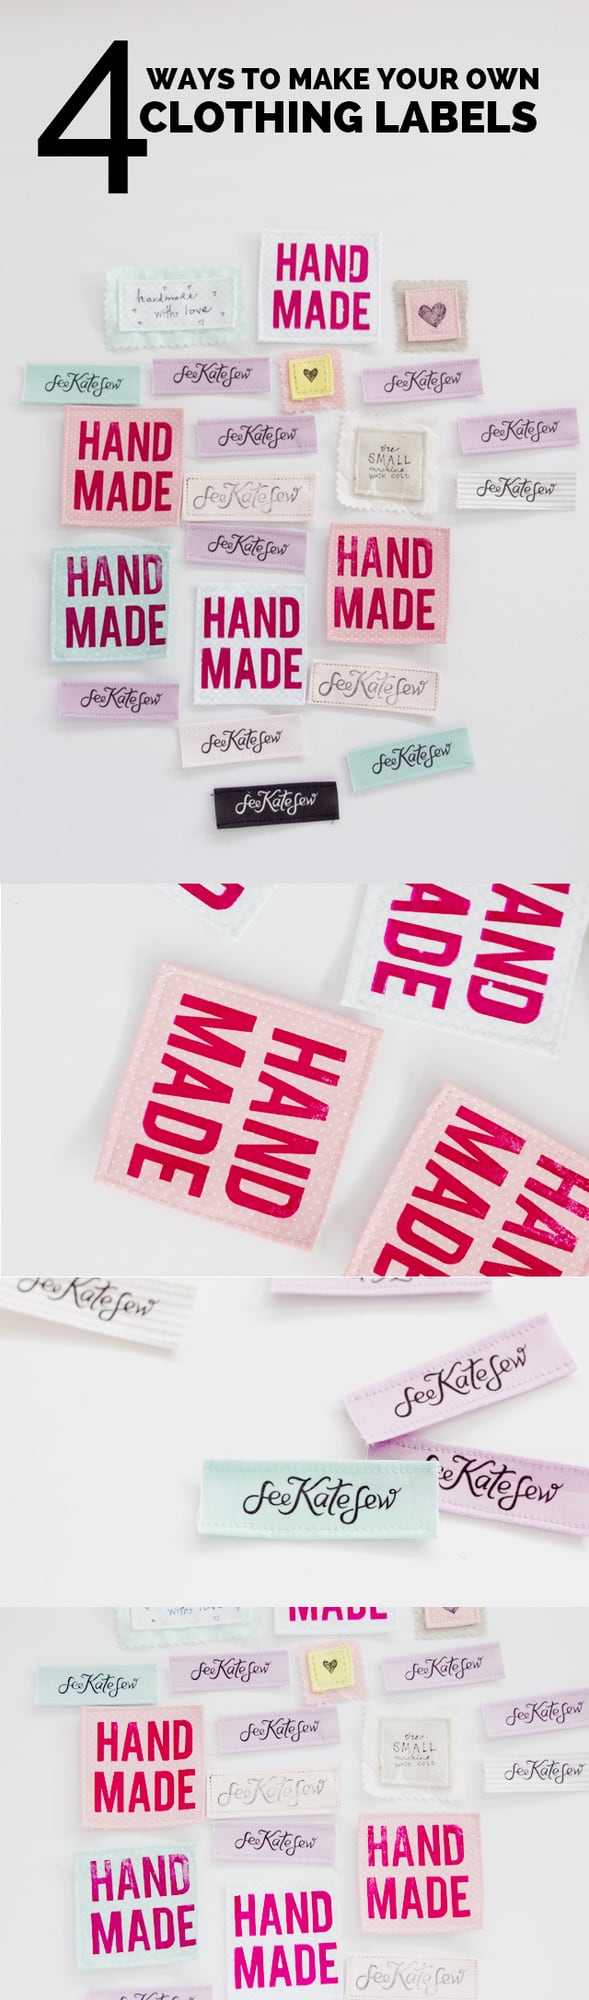 DIY SEWING LABELS | make your own clothing labels | handmade clothing labels | sewing tips and tricks || See Kate Sew #diysewinglabels #sewinglabels #sewingtips